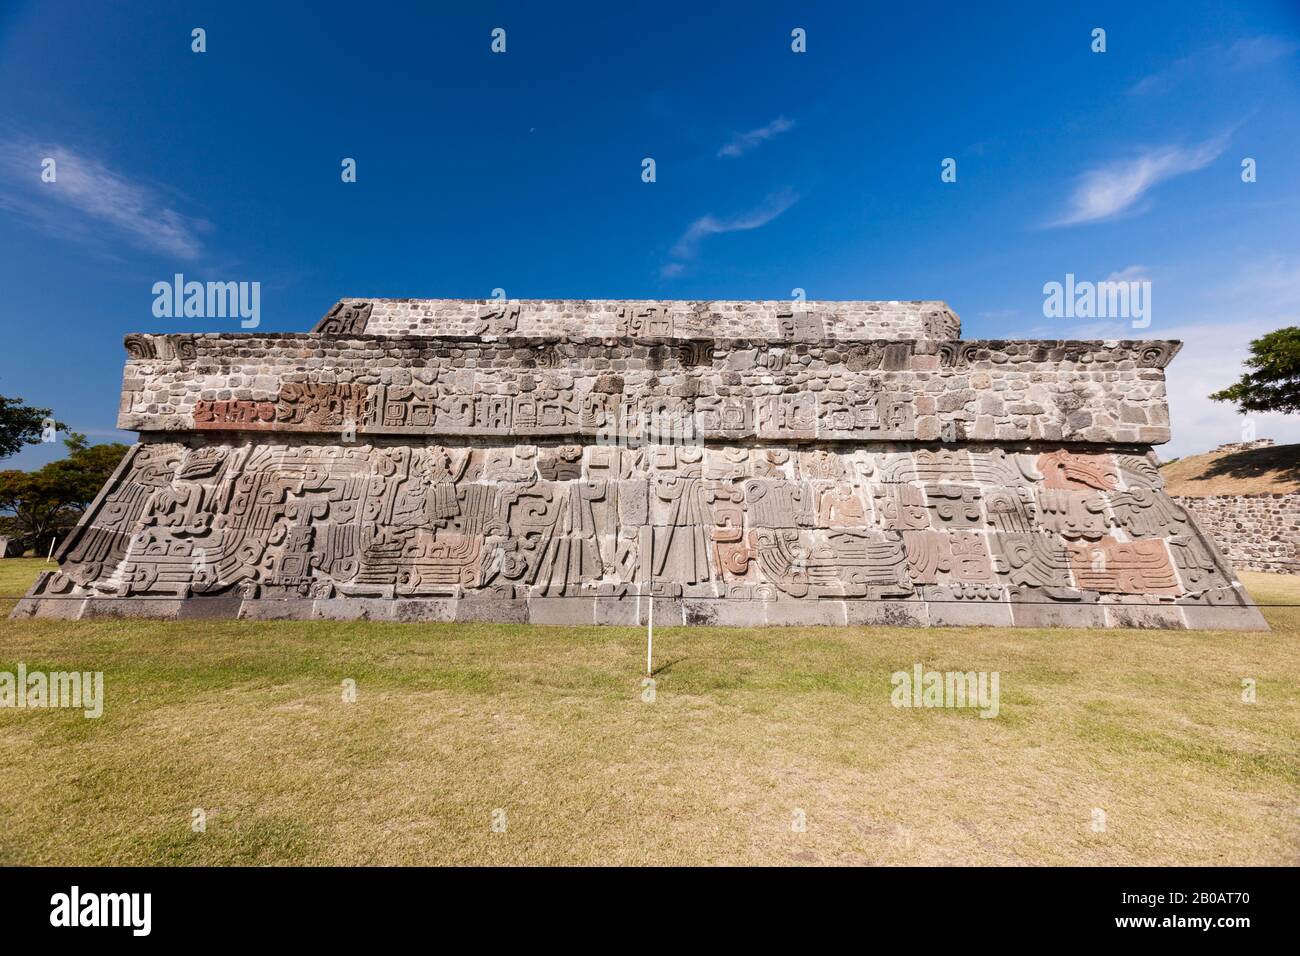 Temple of the Feathered Serpent, Xochicalco archaeological site, Mayan Ruins, Morelos, Mexico, Central America Stock Photo